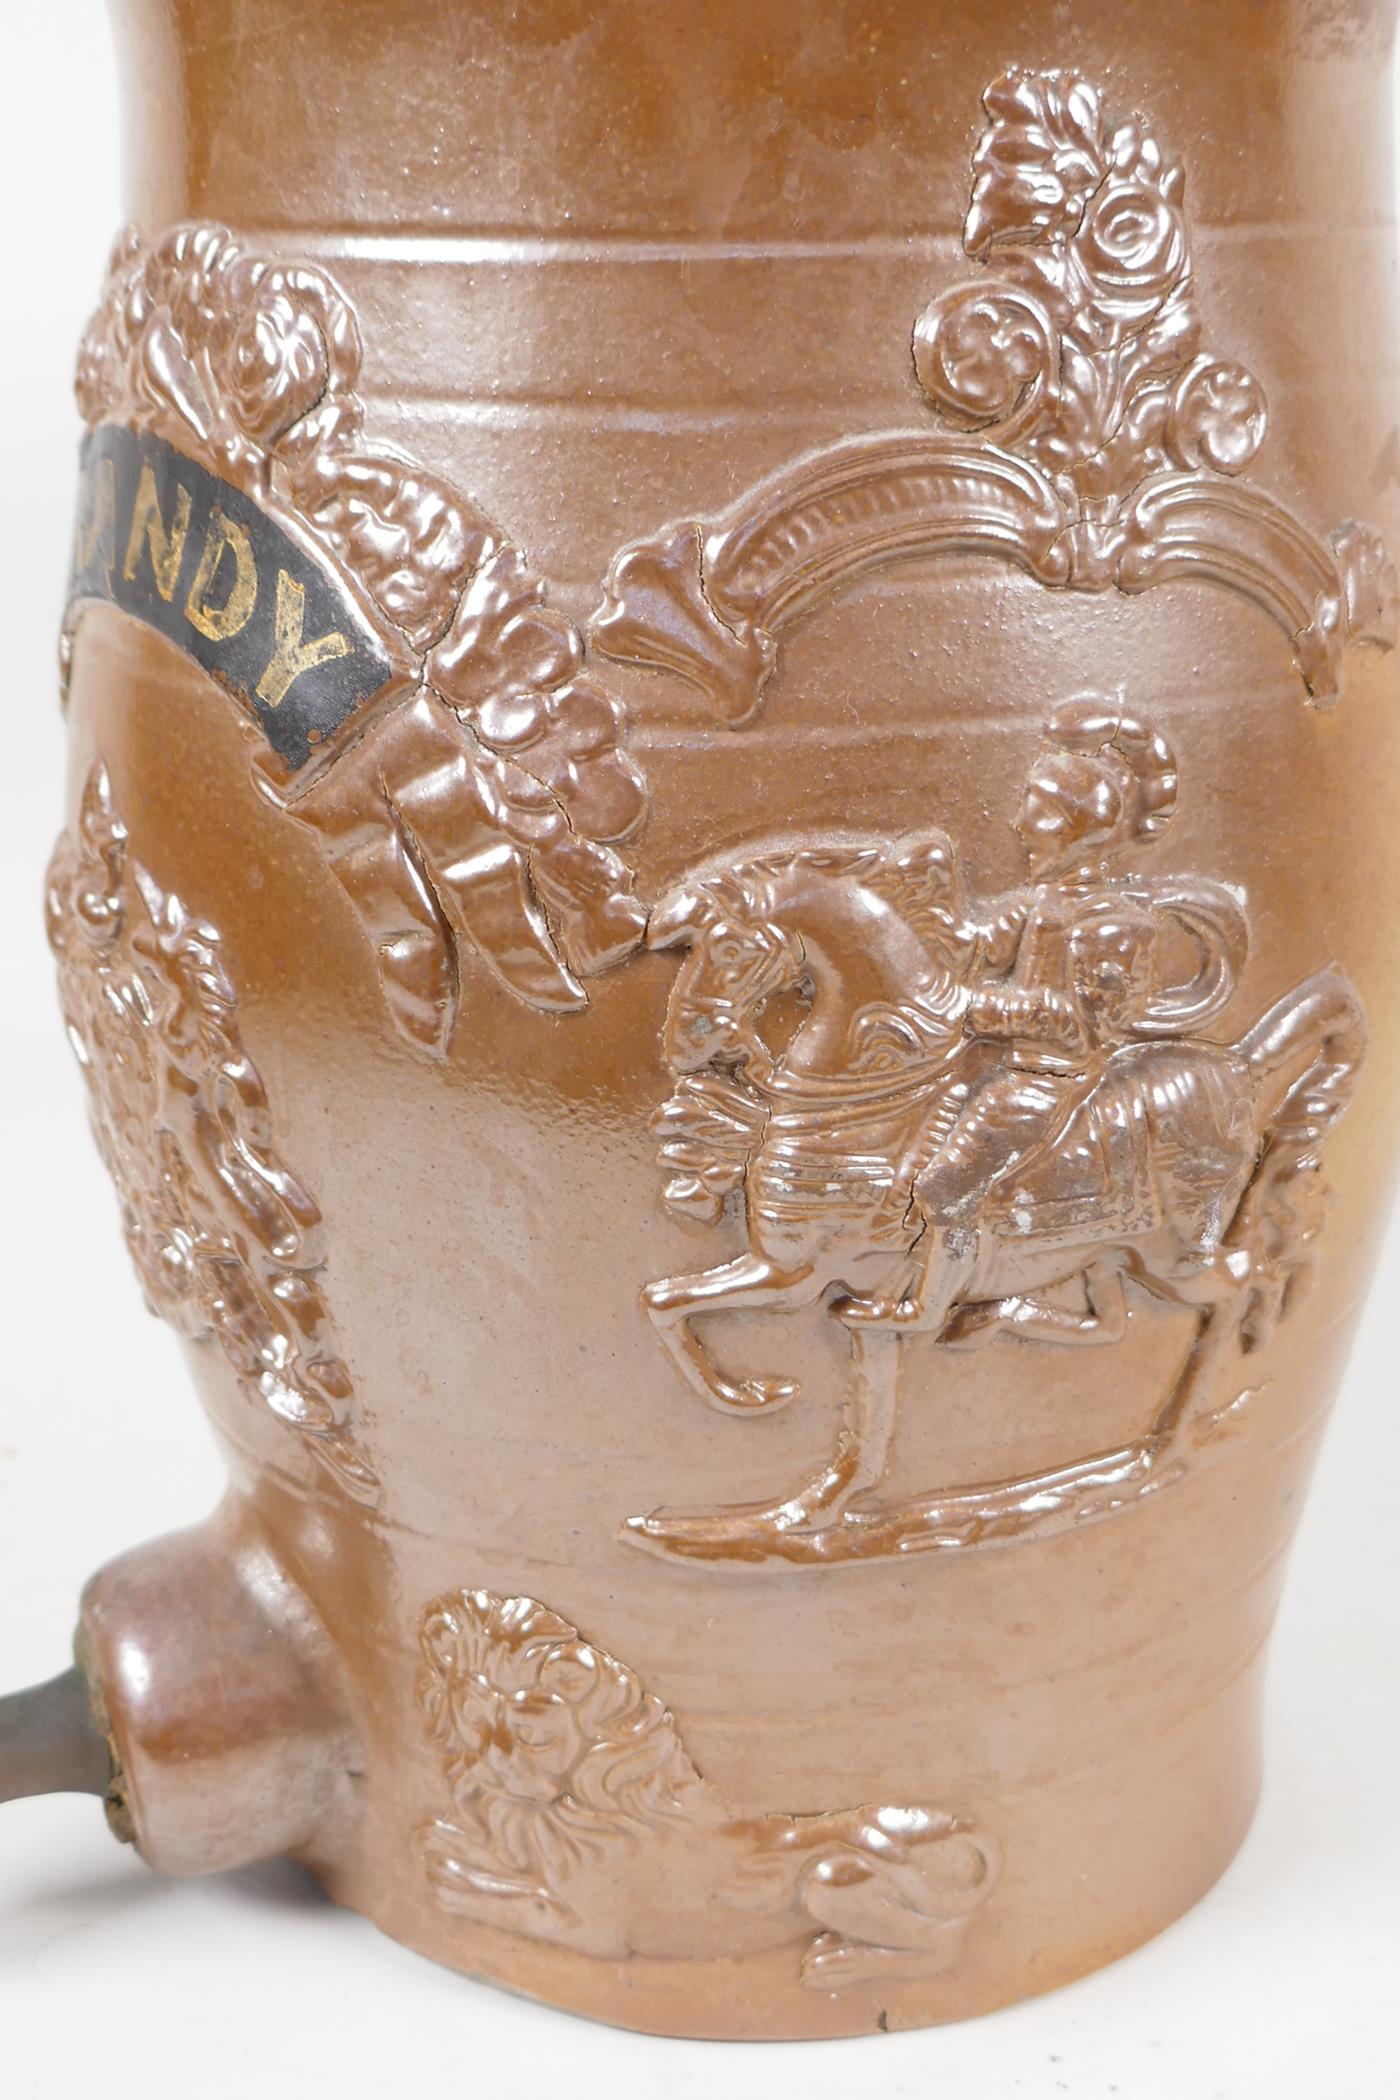 A C19th salt glazed stoneware brandy barrell, embossed with figures of knights on horseback, lions - Image 4 of 4